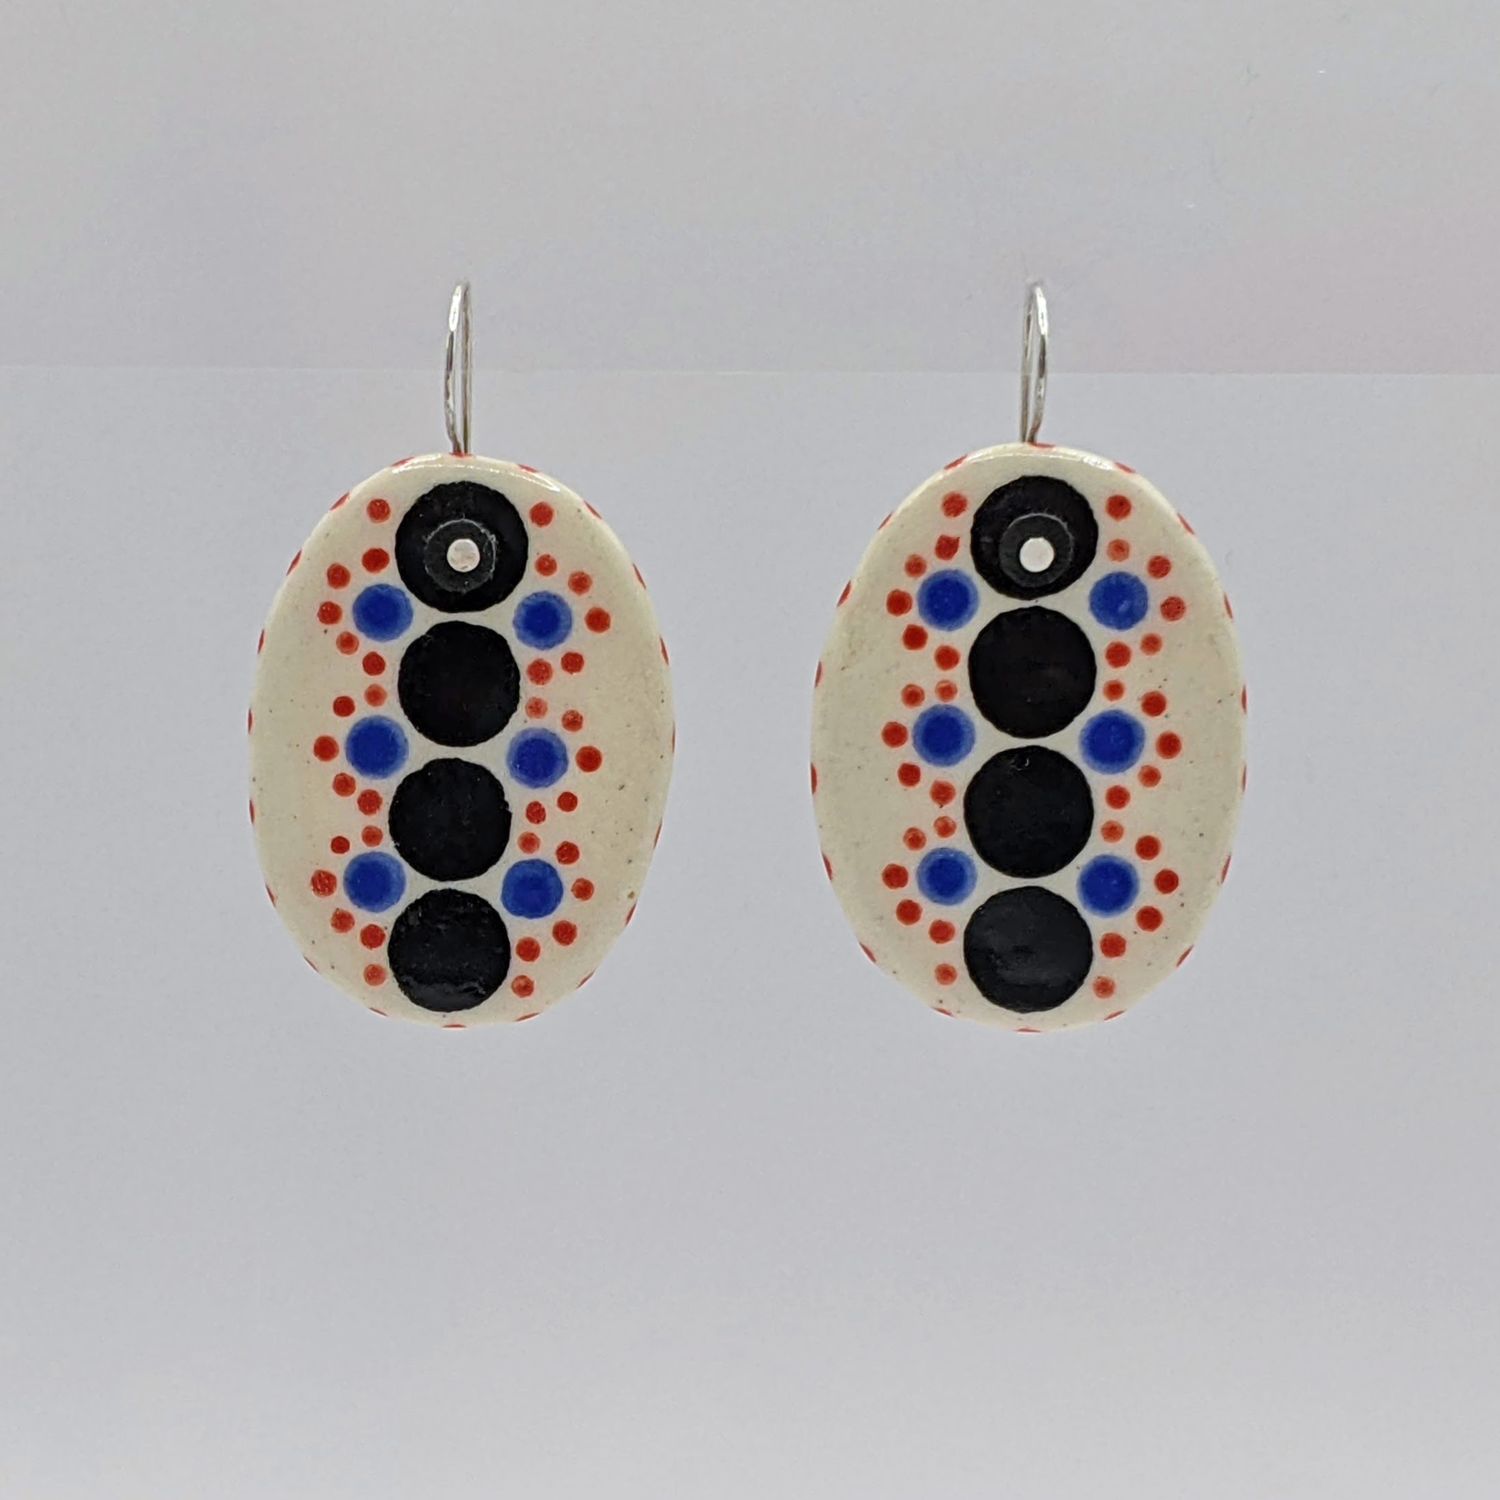 Here and Here: Black and Multi-Coloured Dotted Ceramic Disc Earrings Product Image 1 of 3